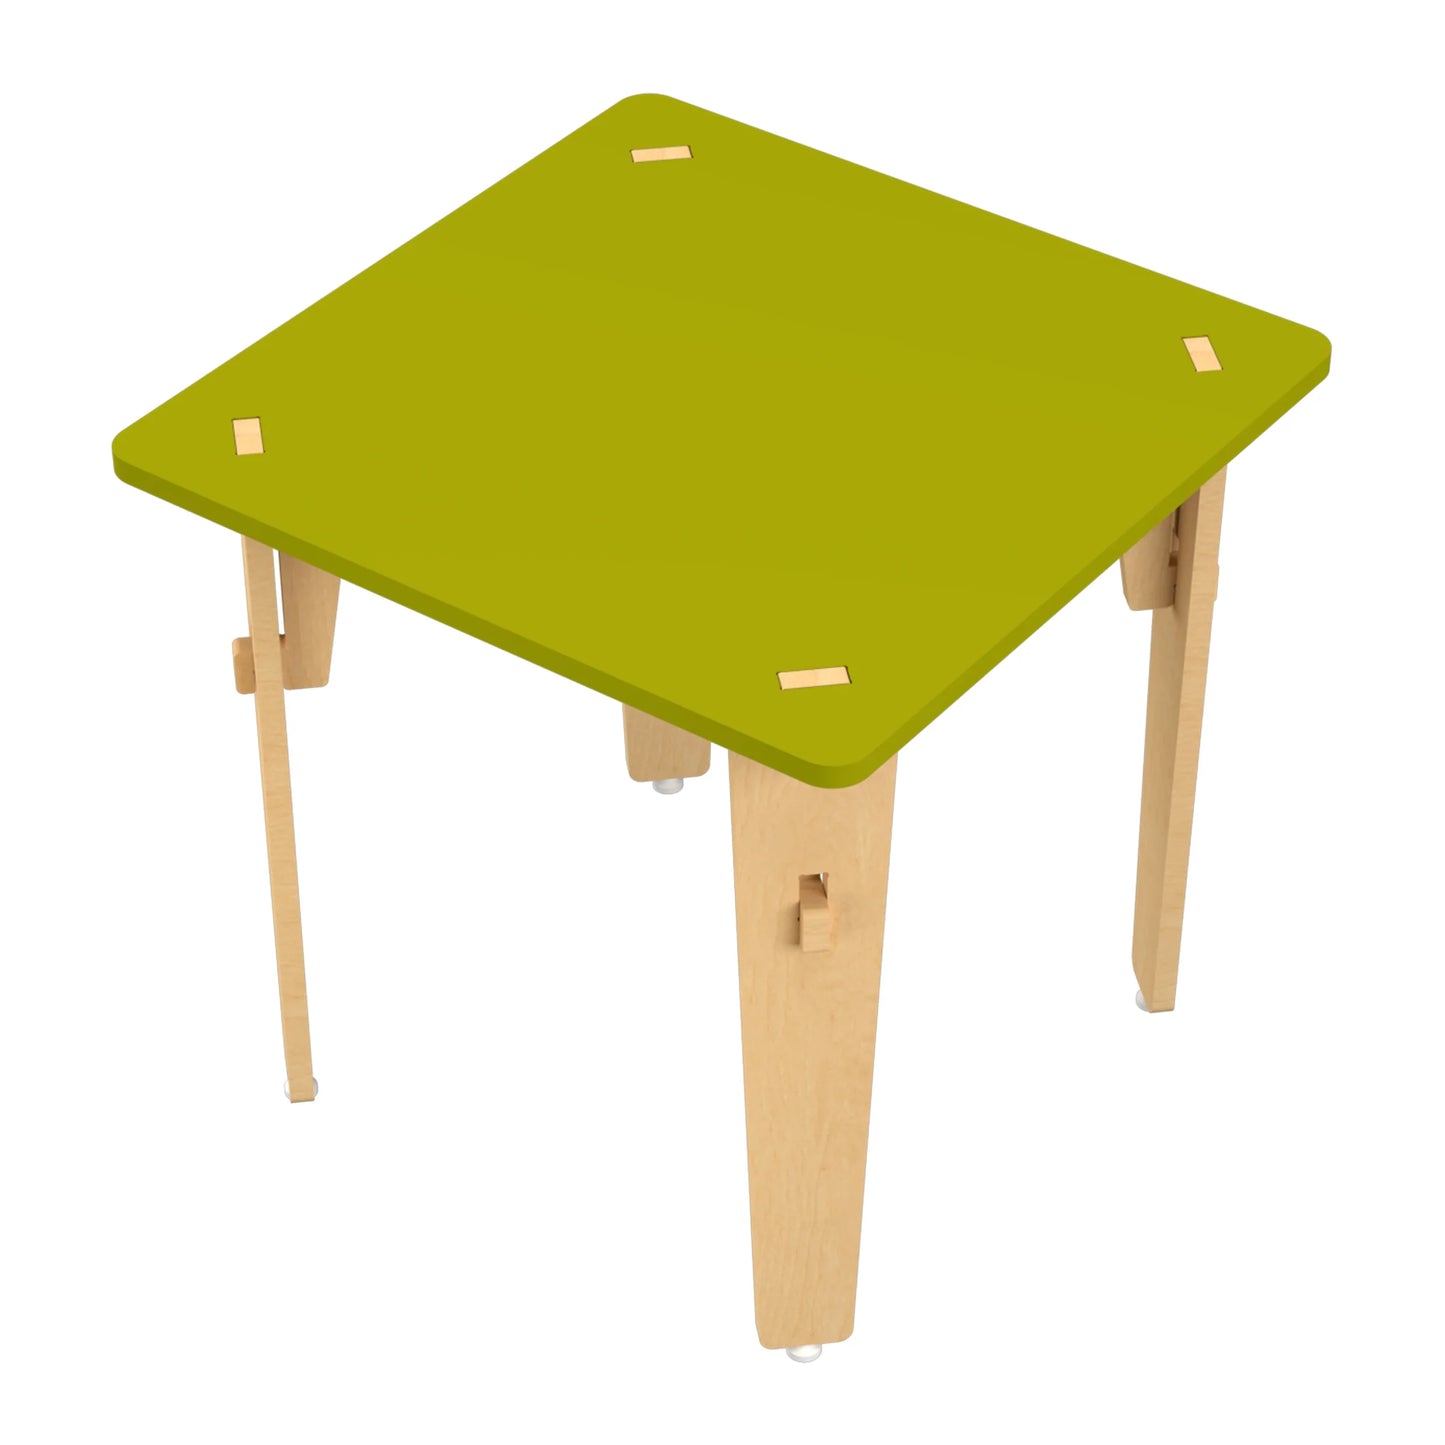 Buy Lime Fig Wooden Table - Green (21 Inches) - SkilloToys.com